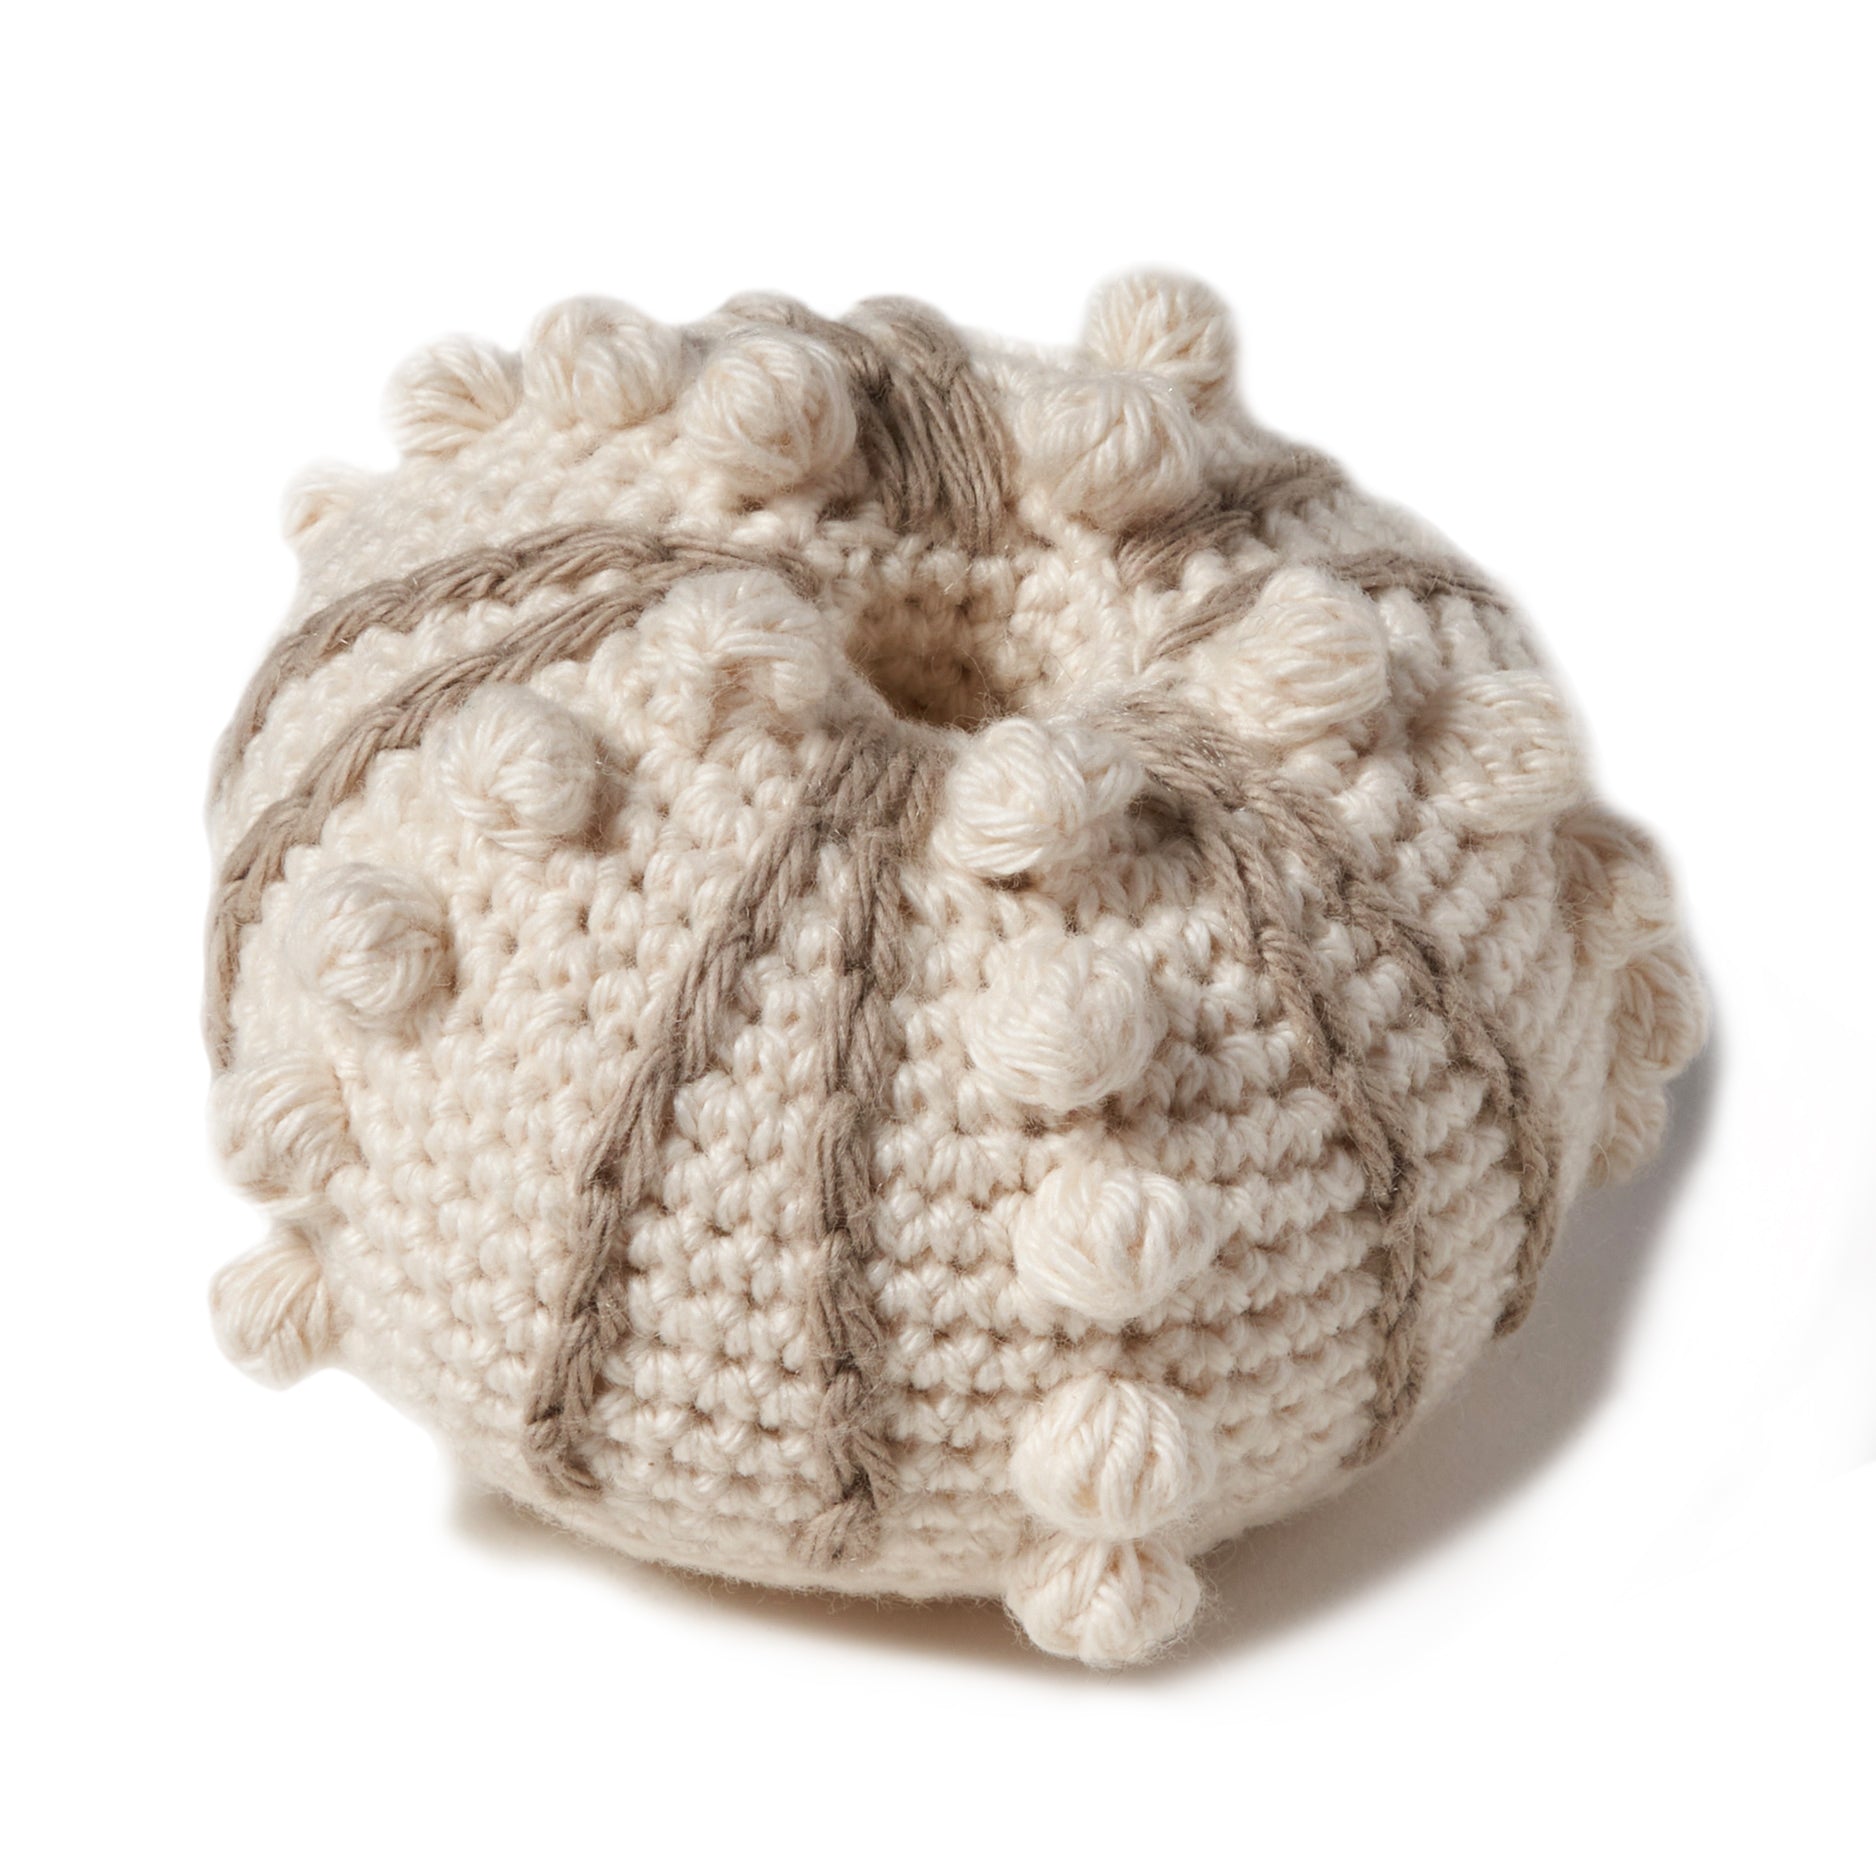 natural organic soft toy in the shape of a sea urchin with a rattle inside and at 3 1/2" in diameter..  100% organic cotton hand crochet knit.